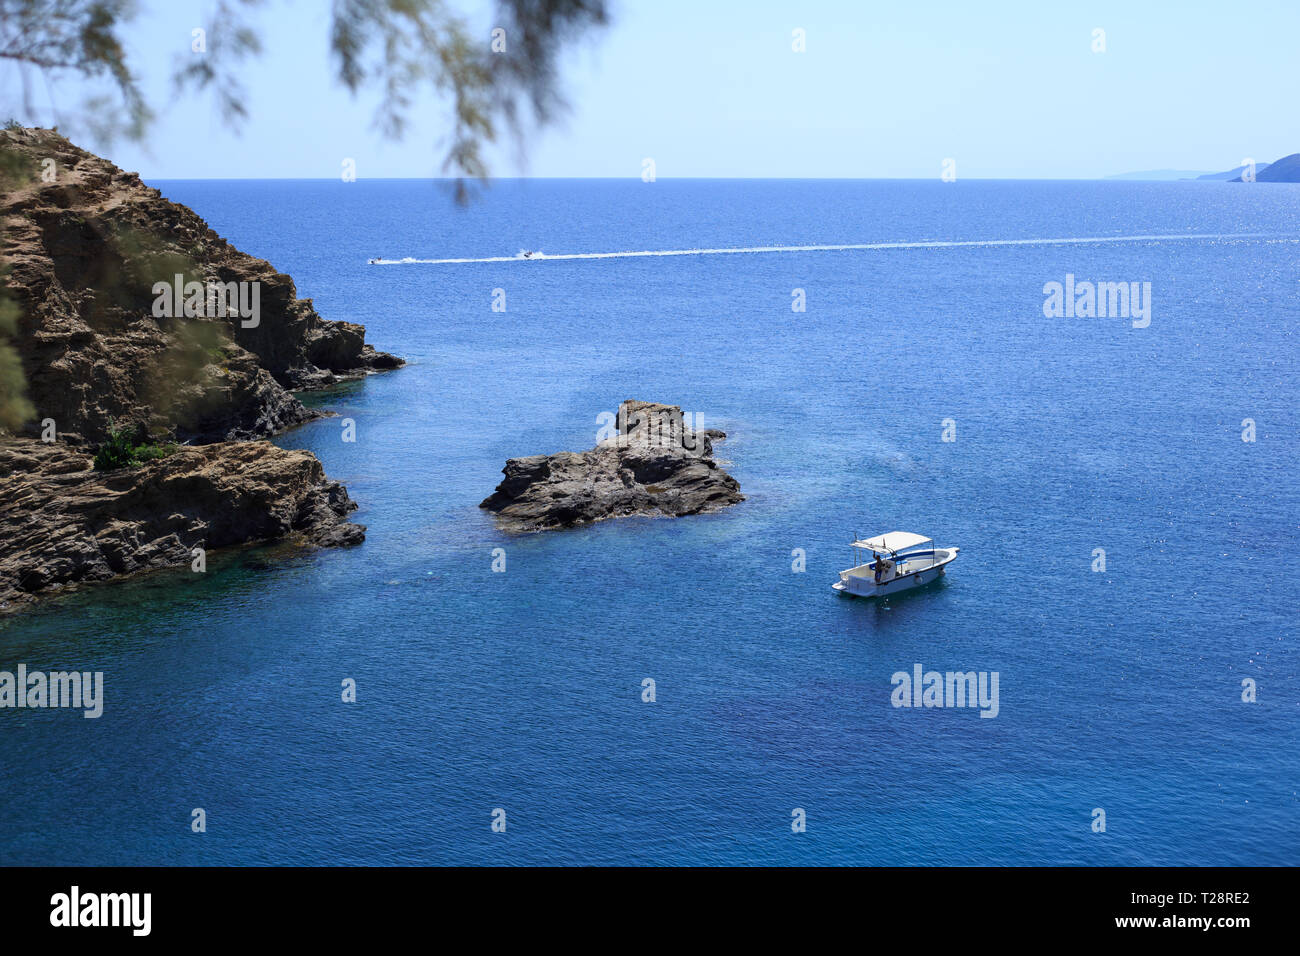 Mountains Bay in the Mediterranean Sea. Sunner vocation. Stock Photo